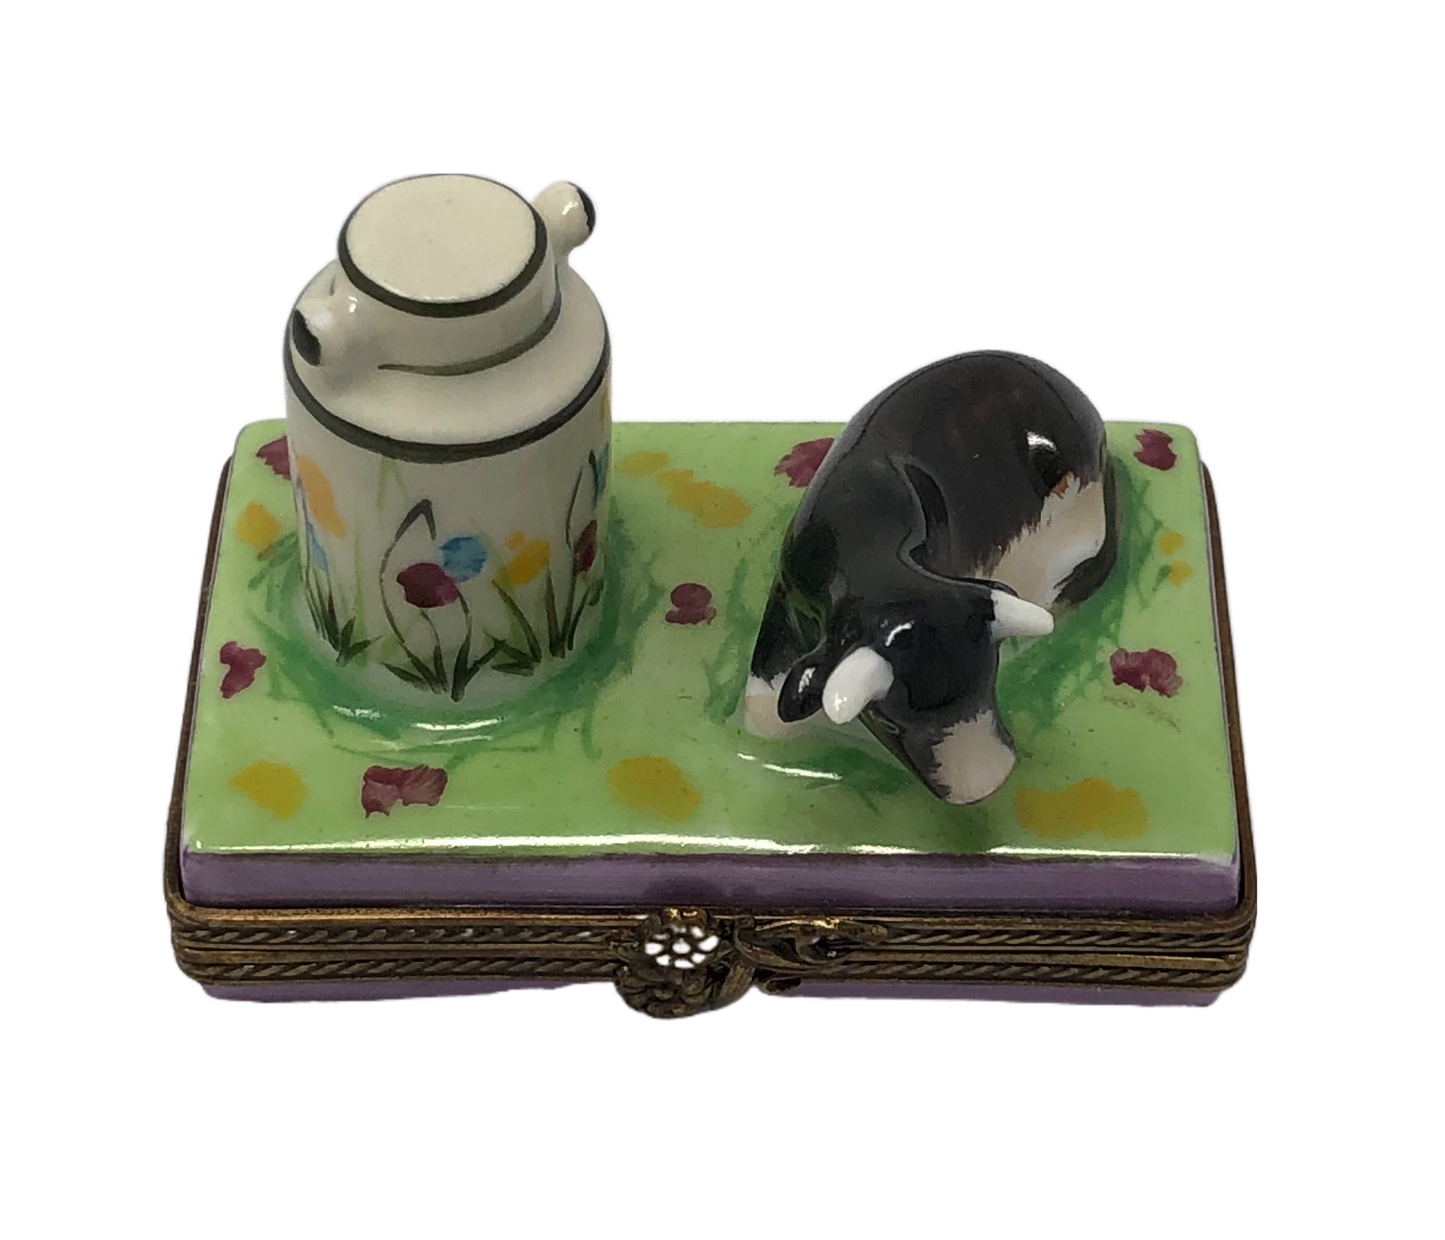 Moo-velous Charm: Hand-Painted Limoges Box with Adorable Cow and Milk Bottle